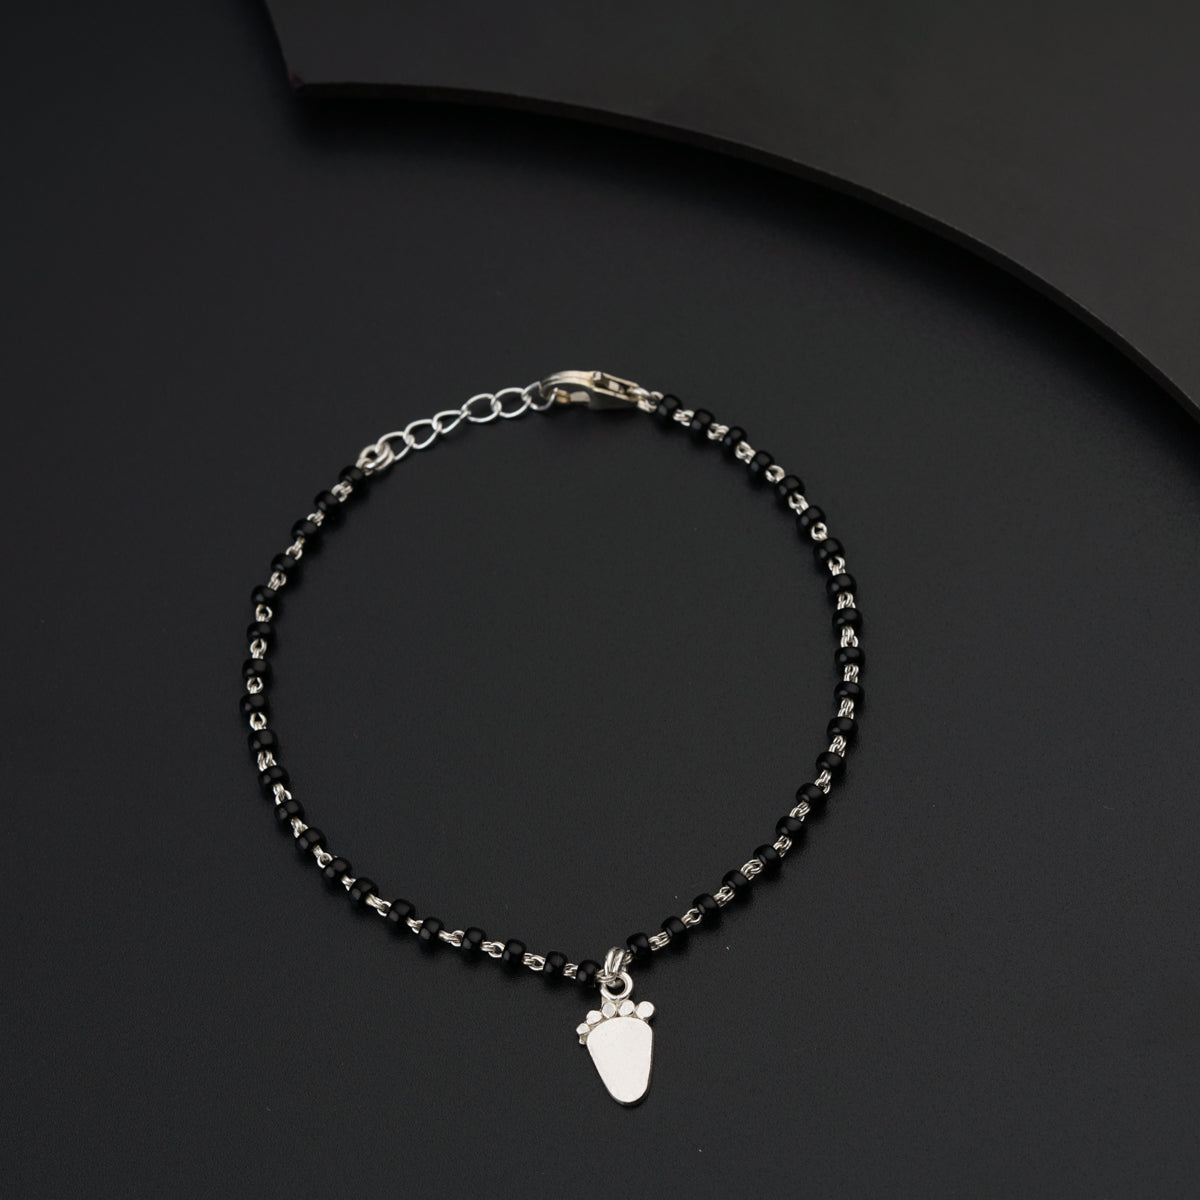 a black beaded bracelet with a silver charm